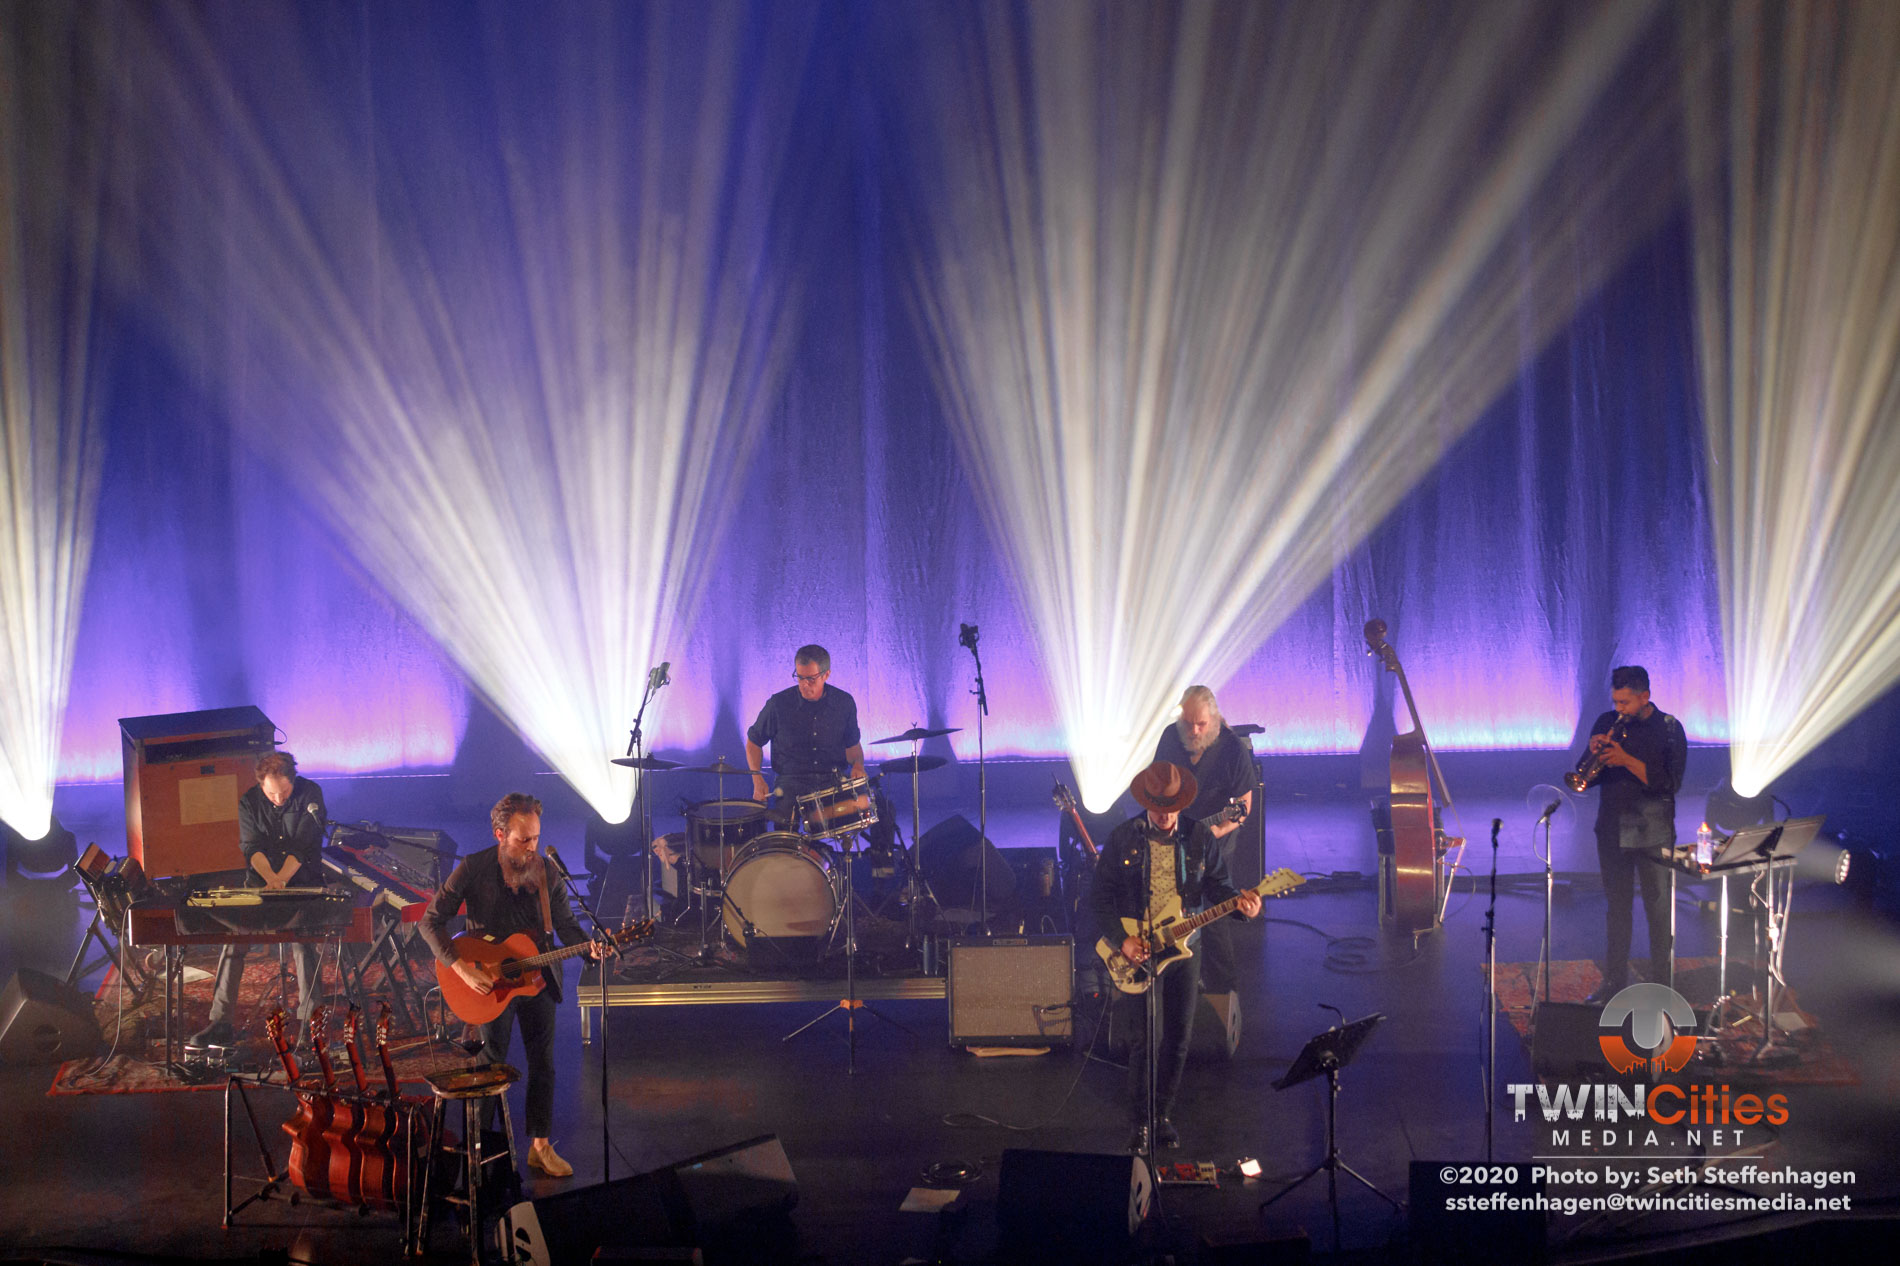 February 14, 2020 - Saint Paul, Minnesota, United States - Calexico And Iron & Wine live in concert at the Palace Theatre along with Madison Cunningham as the opener.

(Photo by Seth Steffenhagen/Steffenhagen Photography)